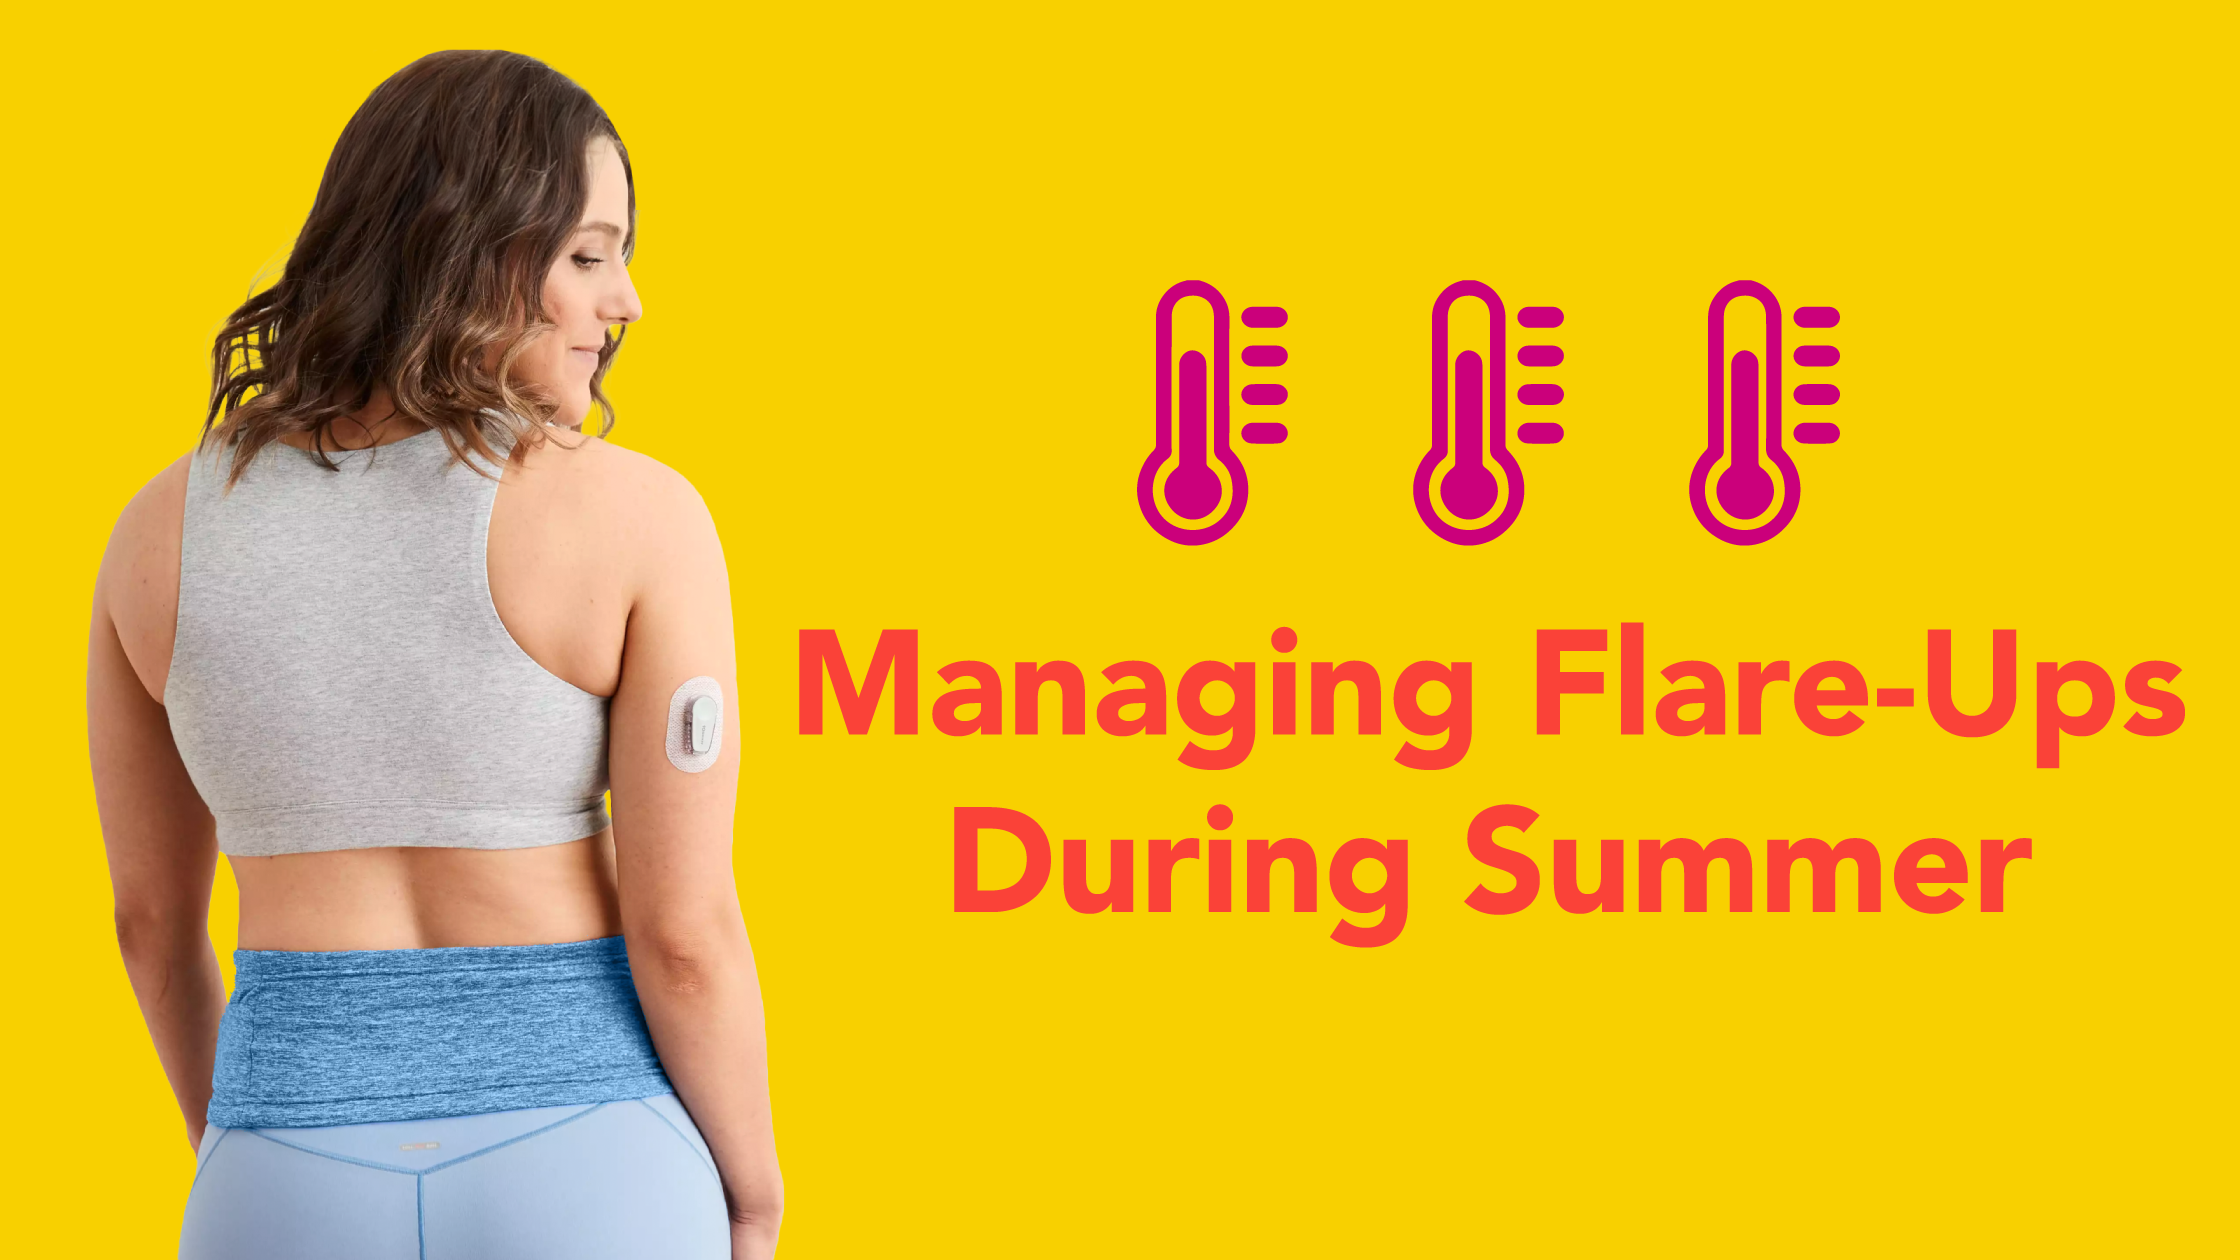 Managing Flare-Ups During Summer: Tips for Staying Comfortable and Confident